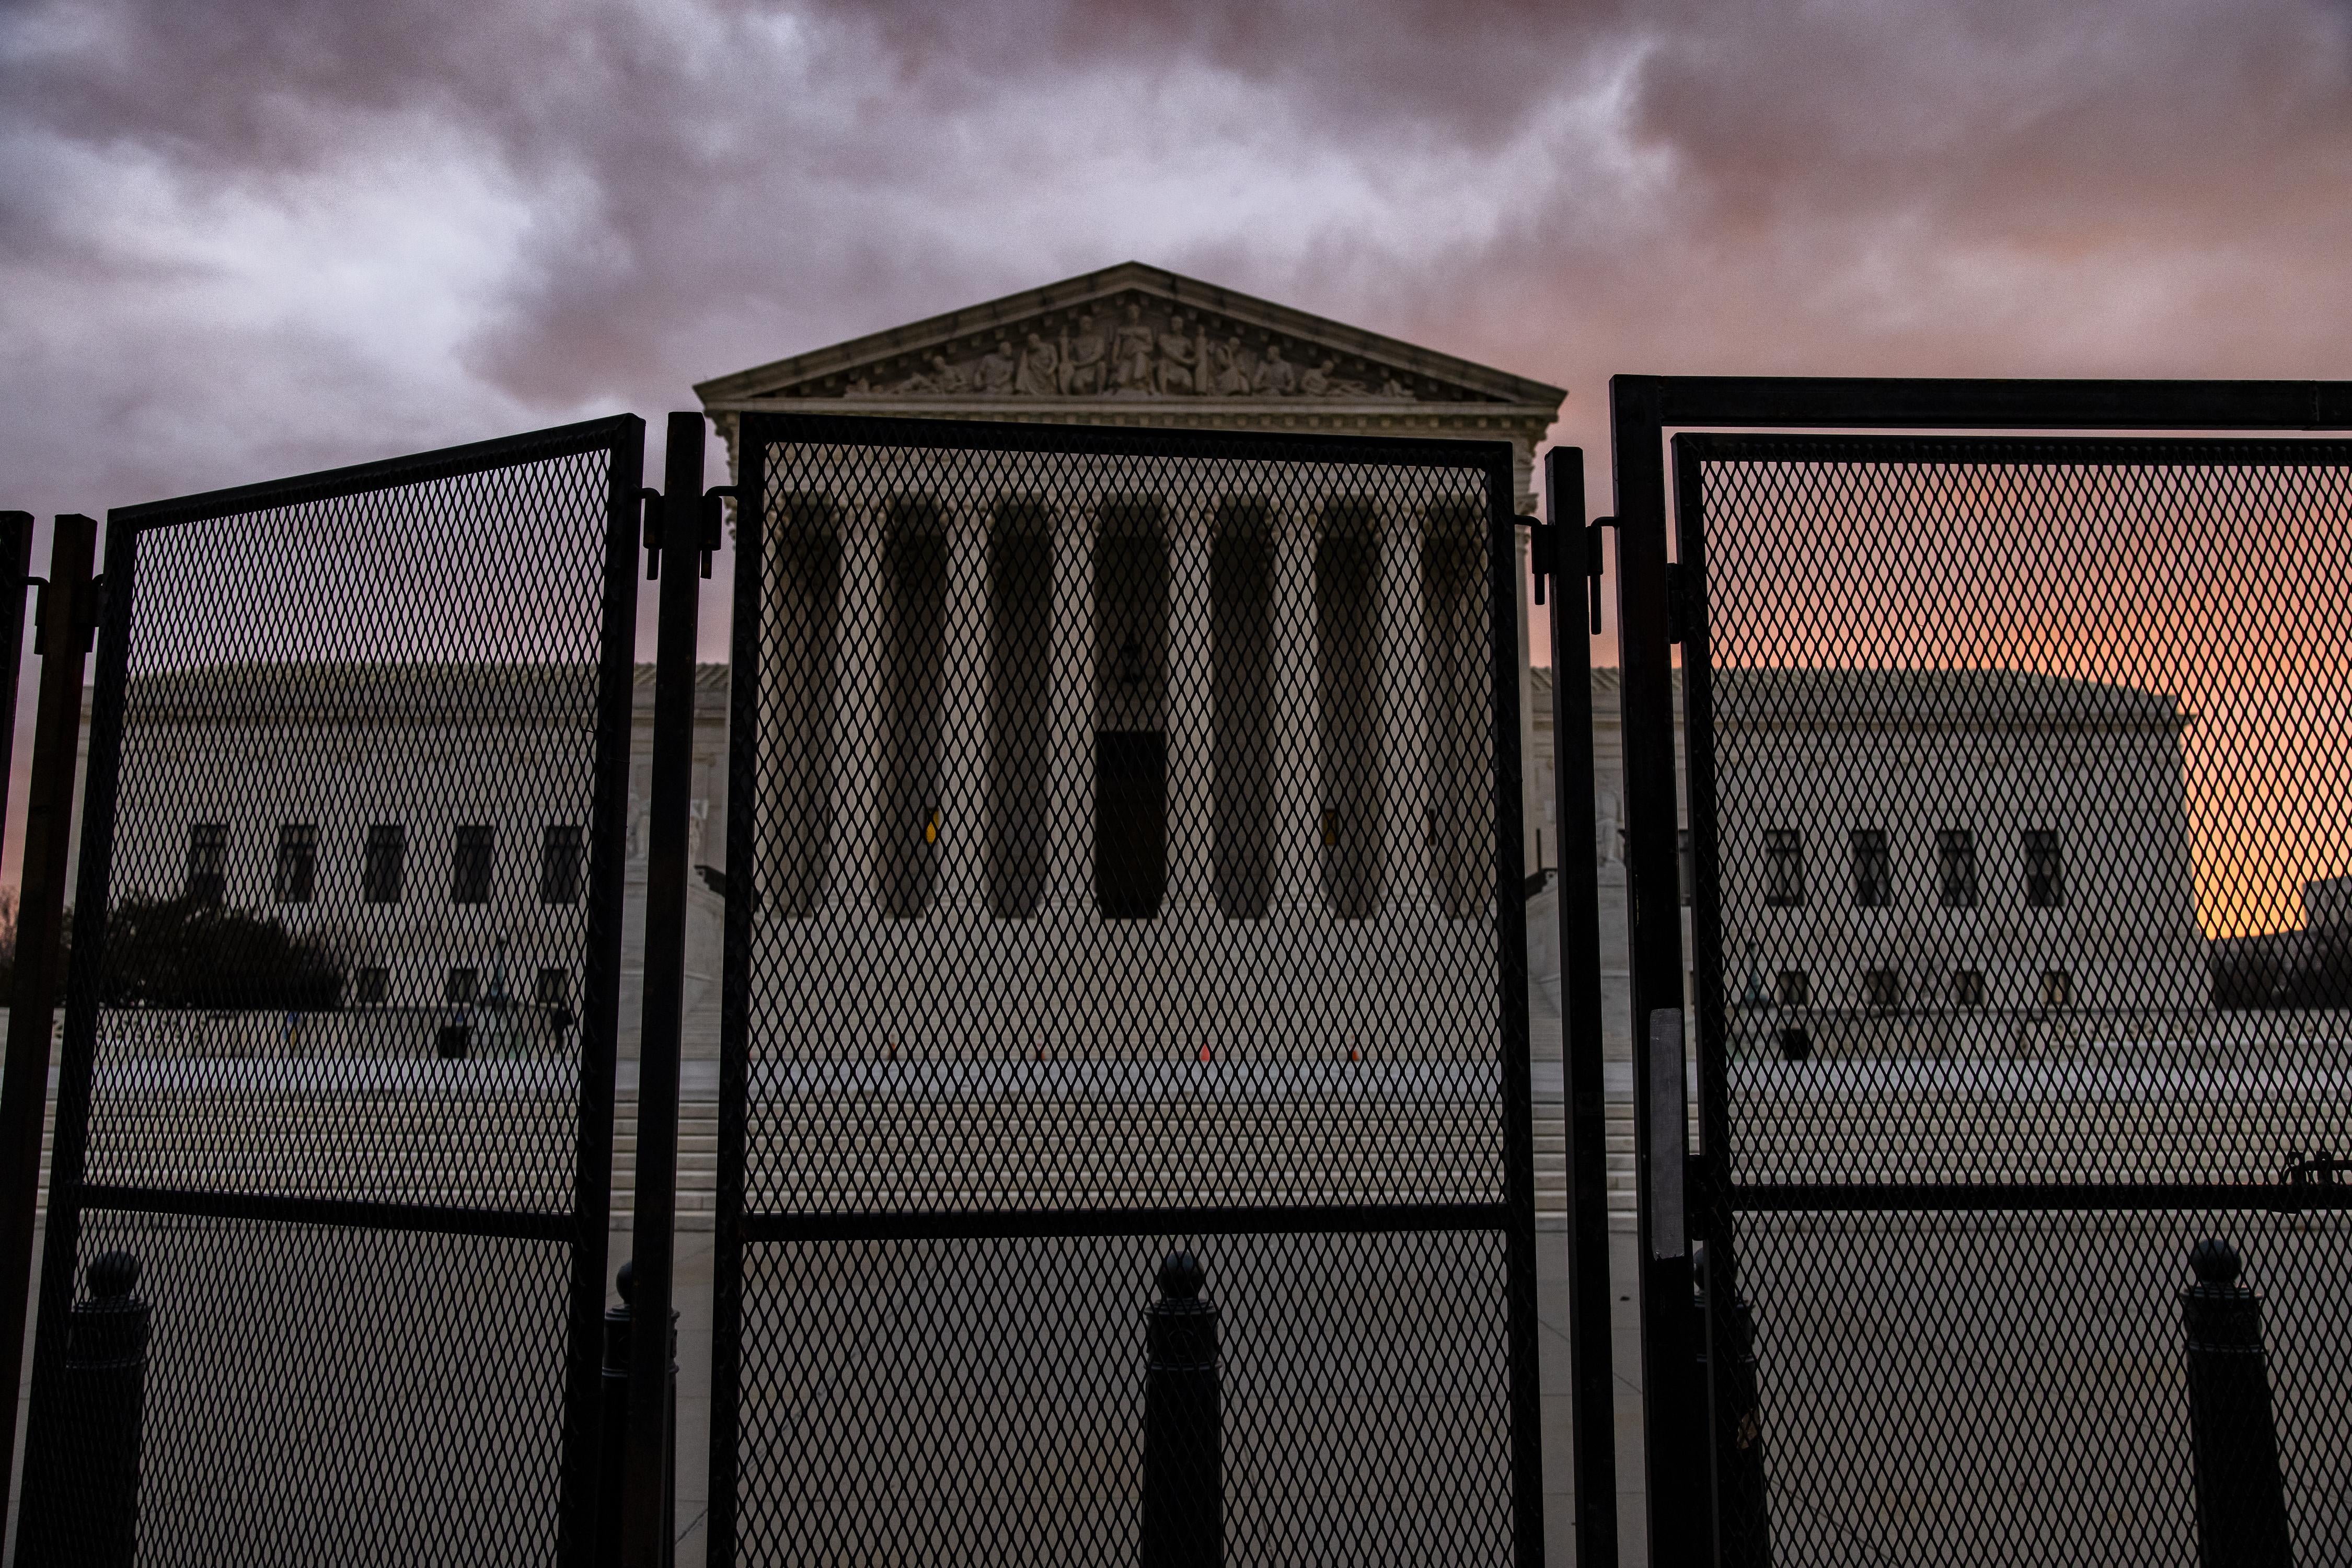 The Supreme Court at dusk, with a large fence around the building.